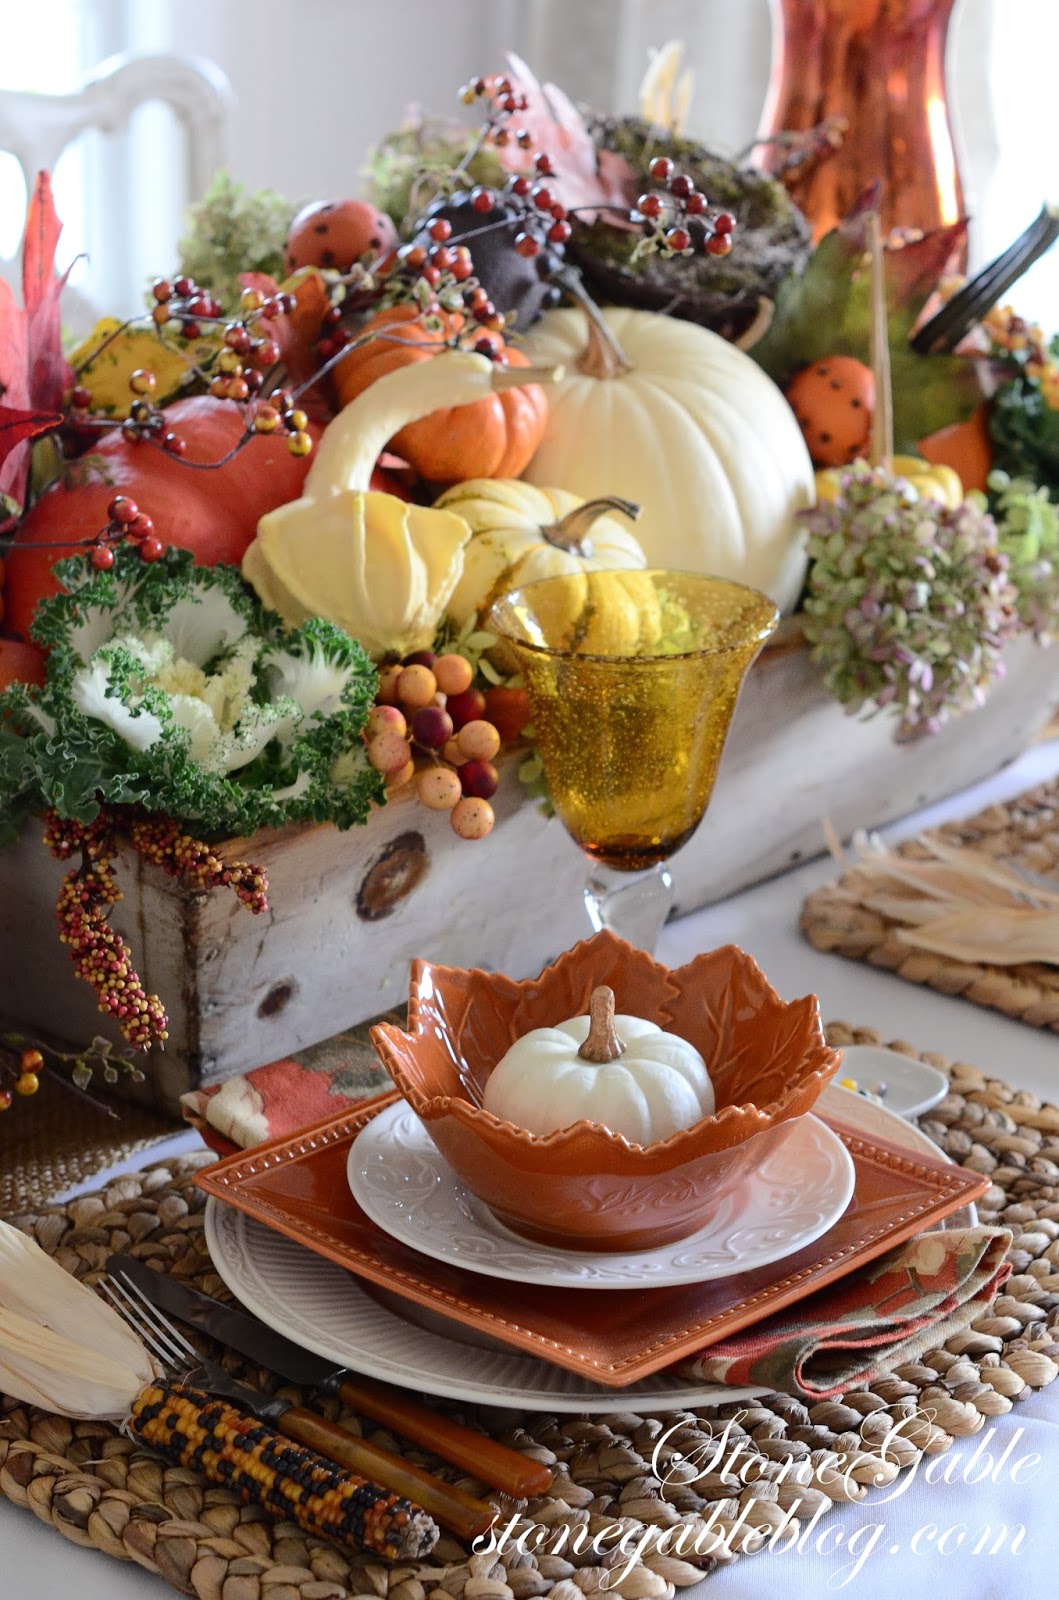 Ash Tree Cottage: Need Some Thanksgiving Tablescape Ideas?